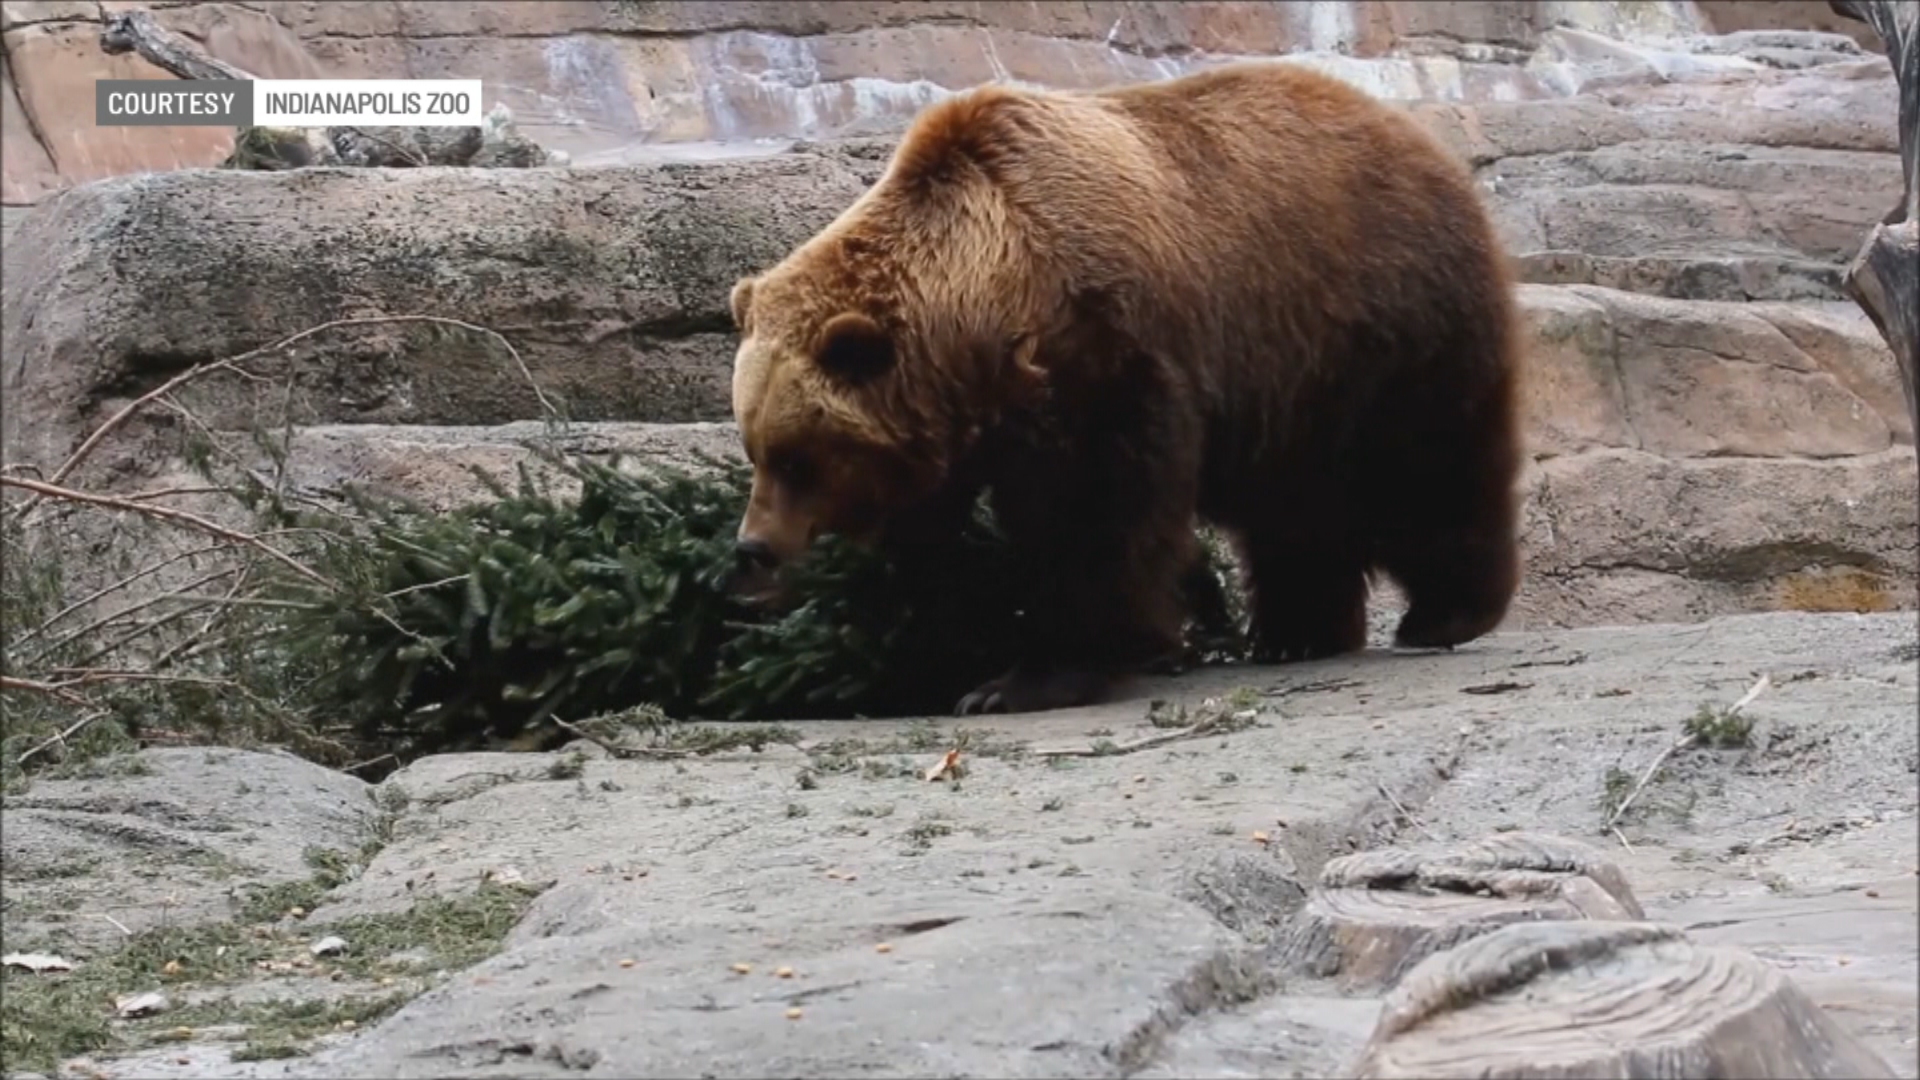 Indianapolis Zoo takes extra care of animals during winter months